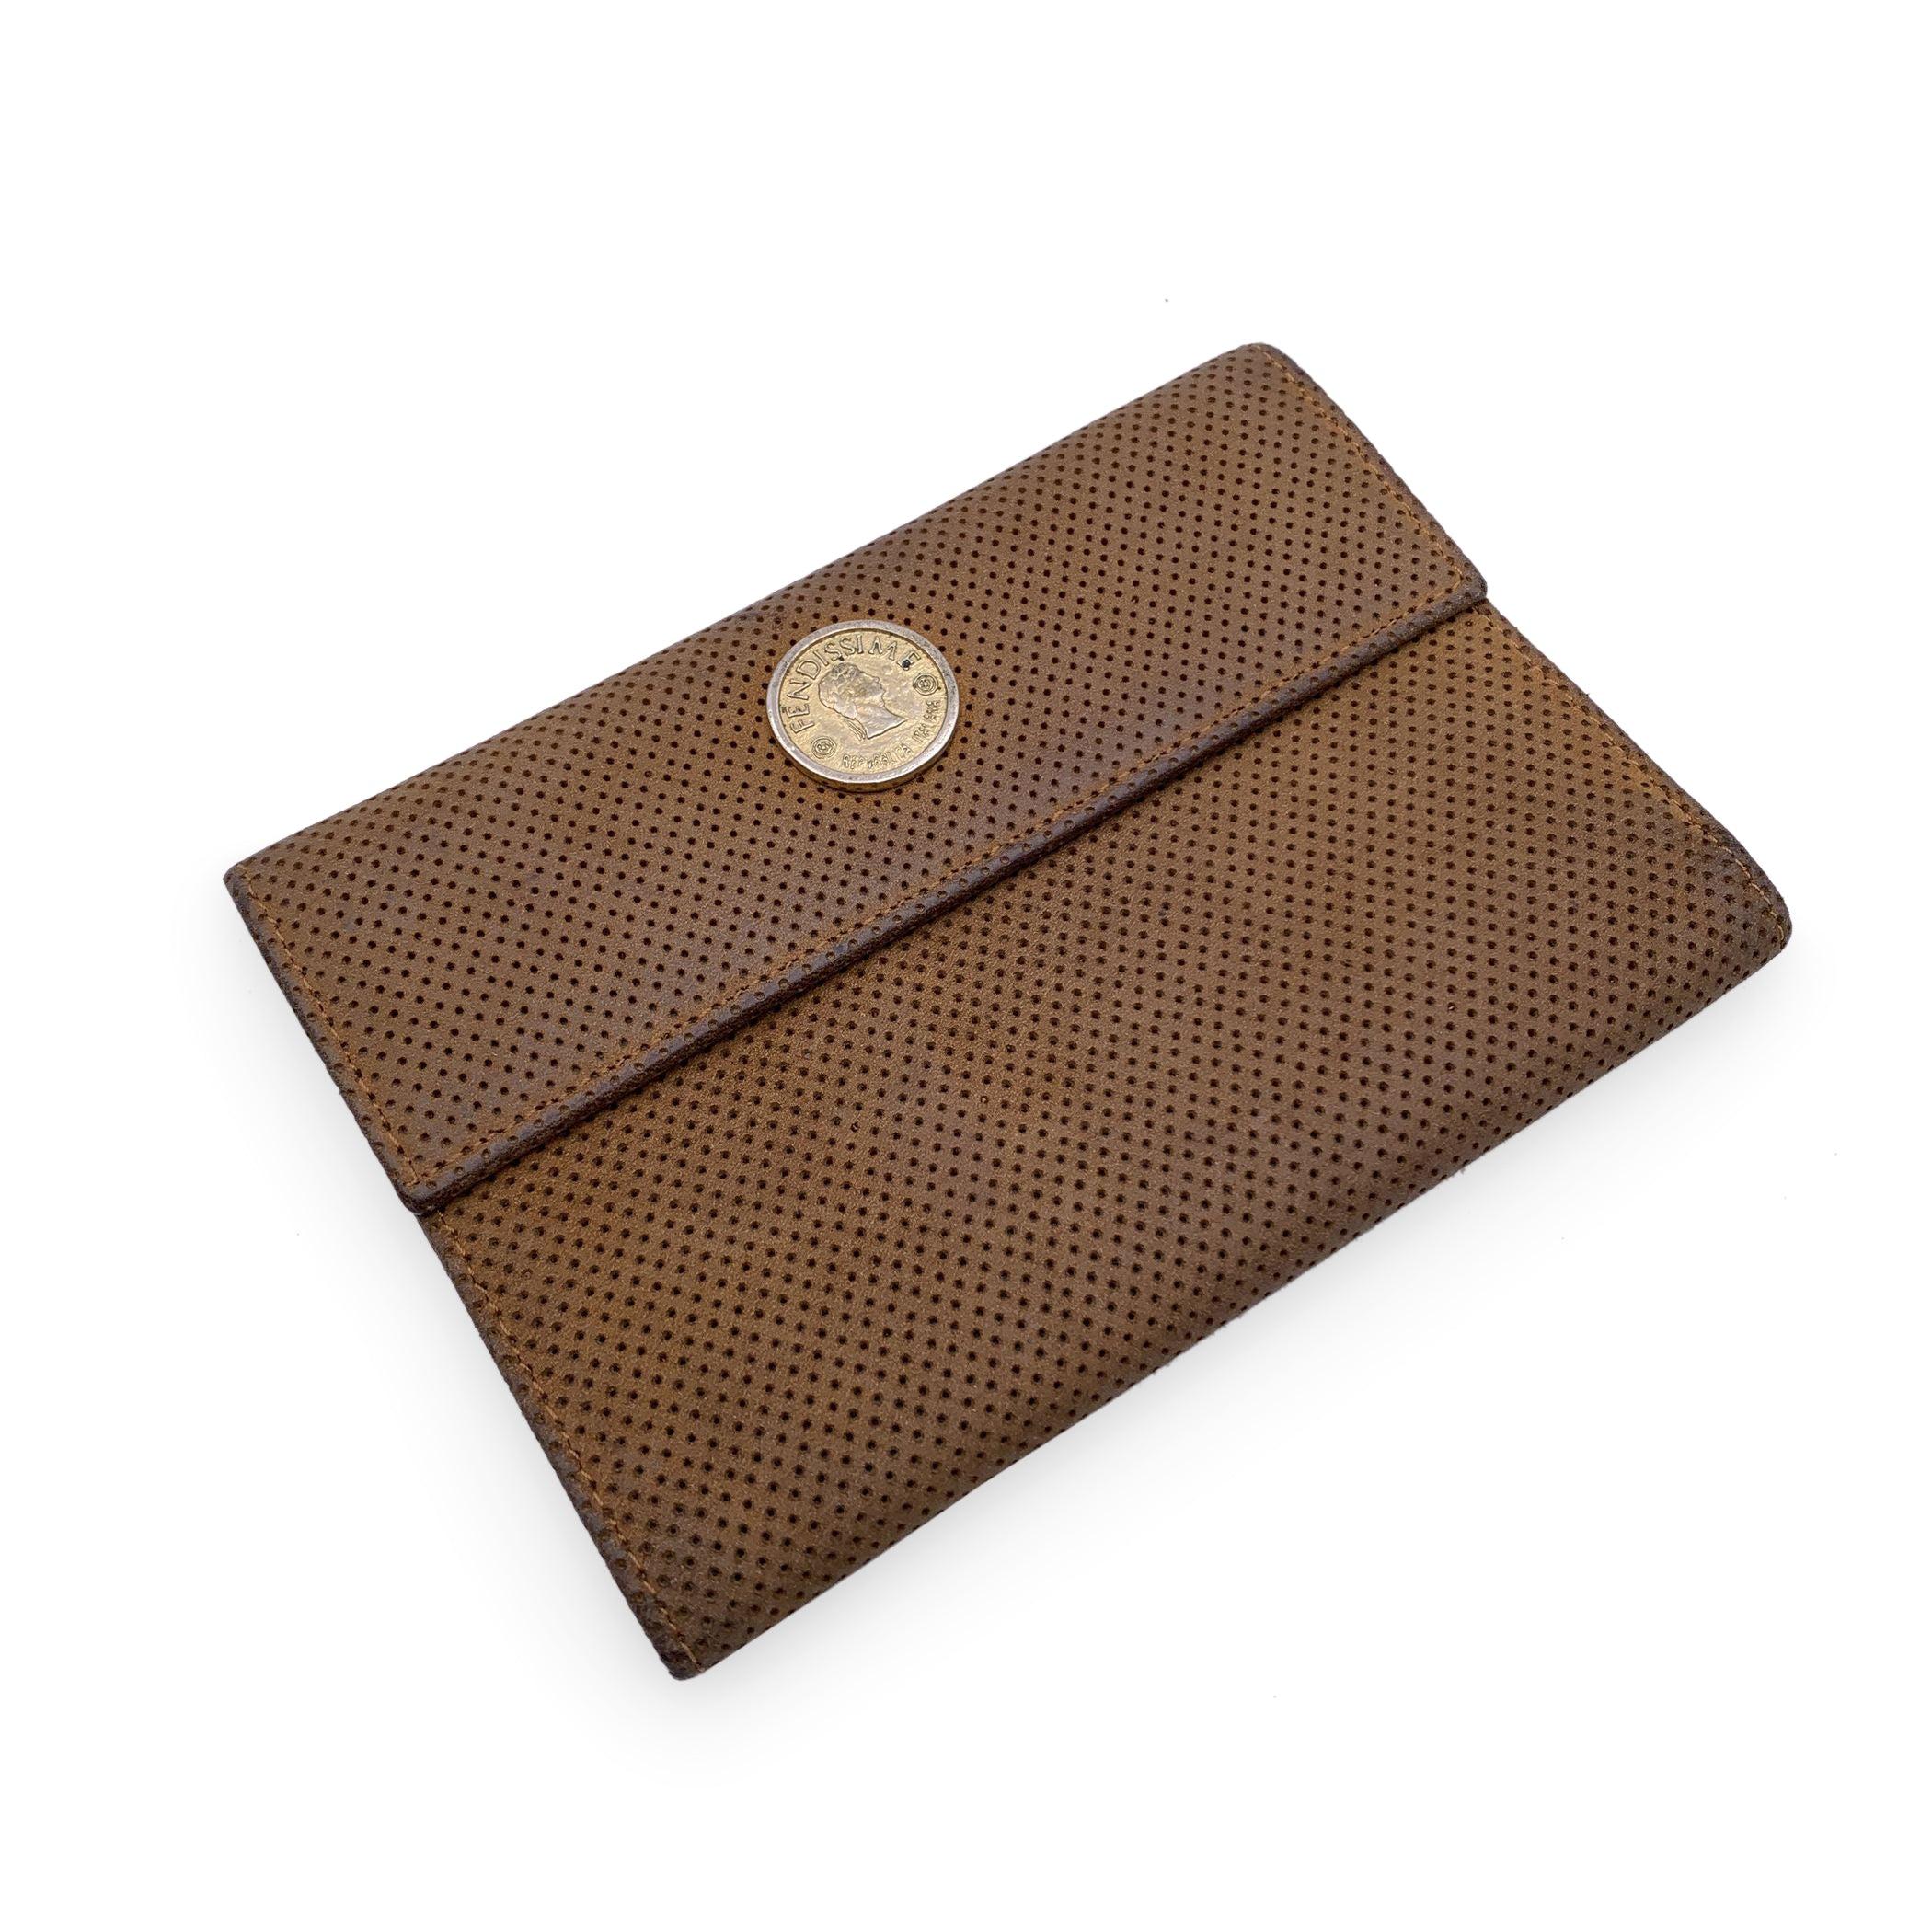 Vintage Fendissime wallet in beige perforated leather. FENDISSIME coin tab on the front. Flap with button closure. 3 credit card slots, and 2 open pockets , 1 zip compartment and 1 bill compartment. Leather interior. 'Fendissime - Made in Italy'